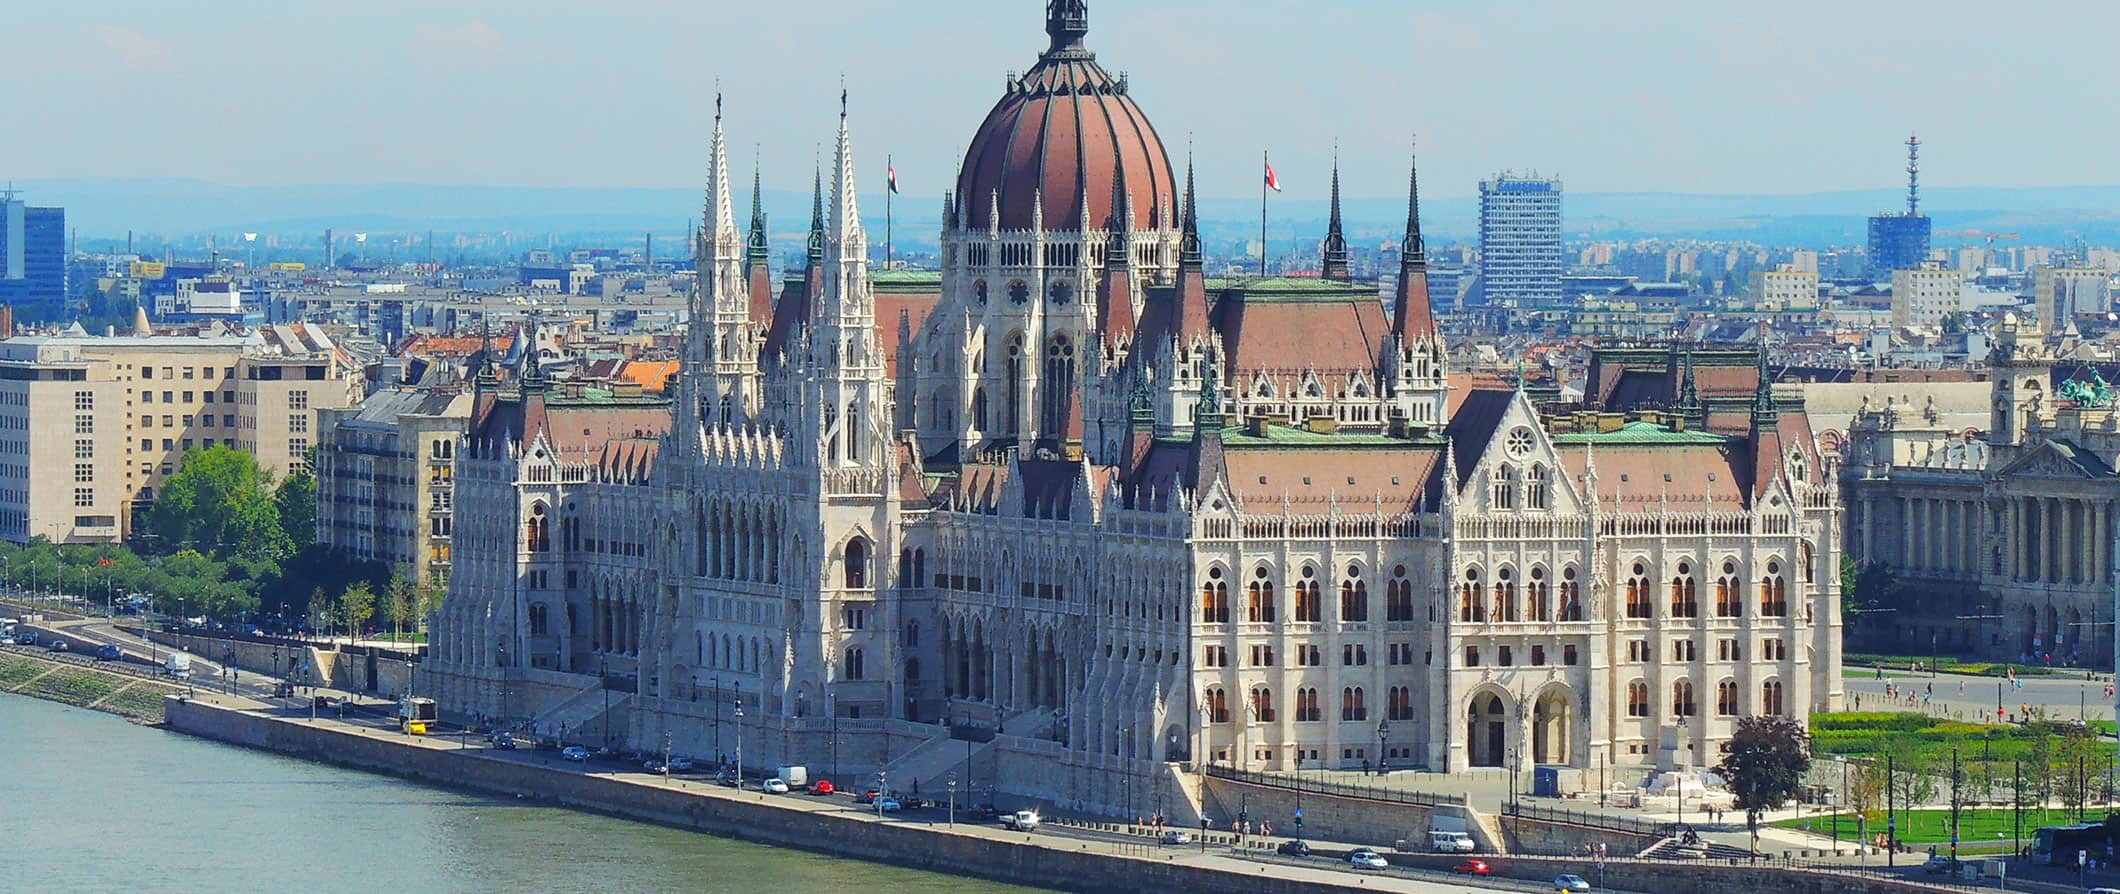 The massive Hungarian Parliament building beside the Danube River in Budapest, Hungary